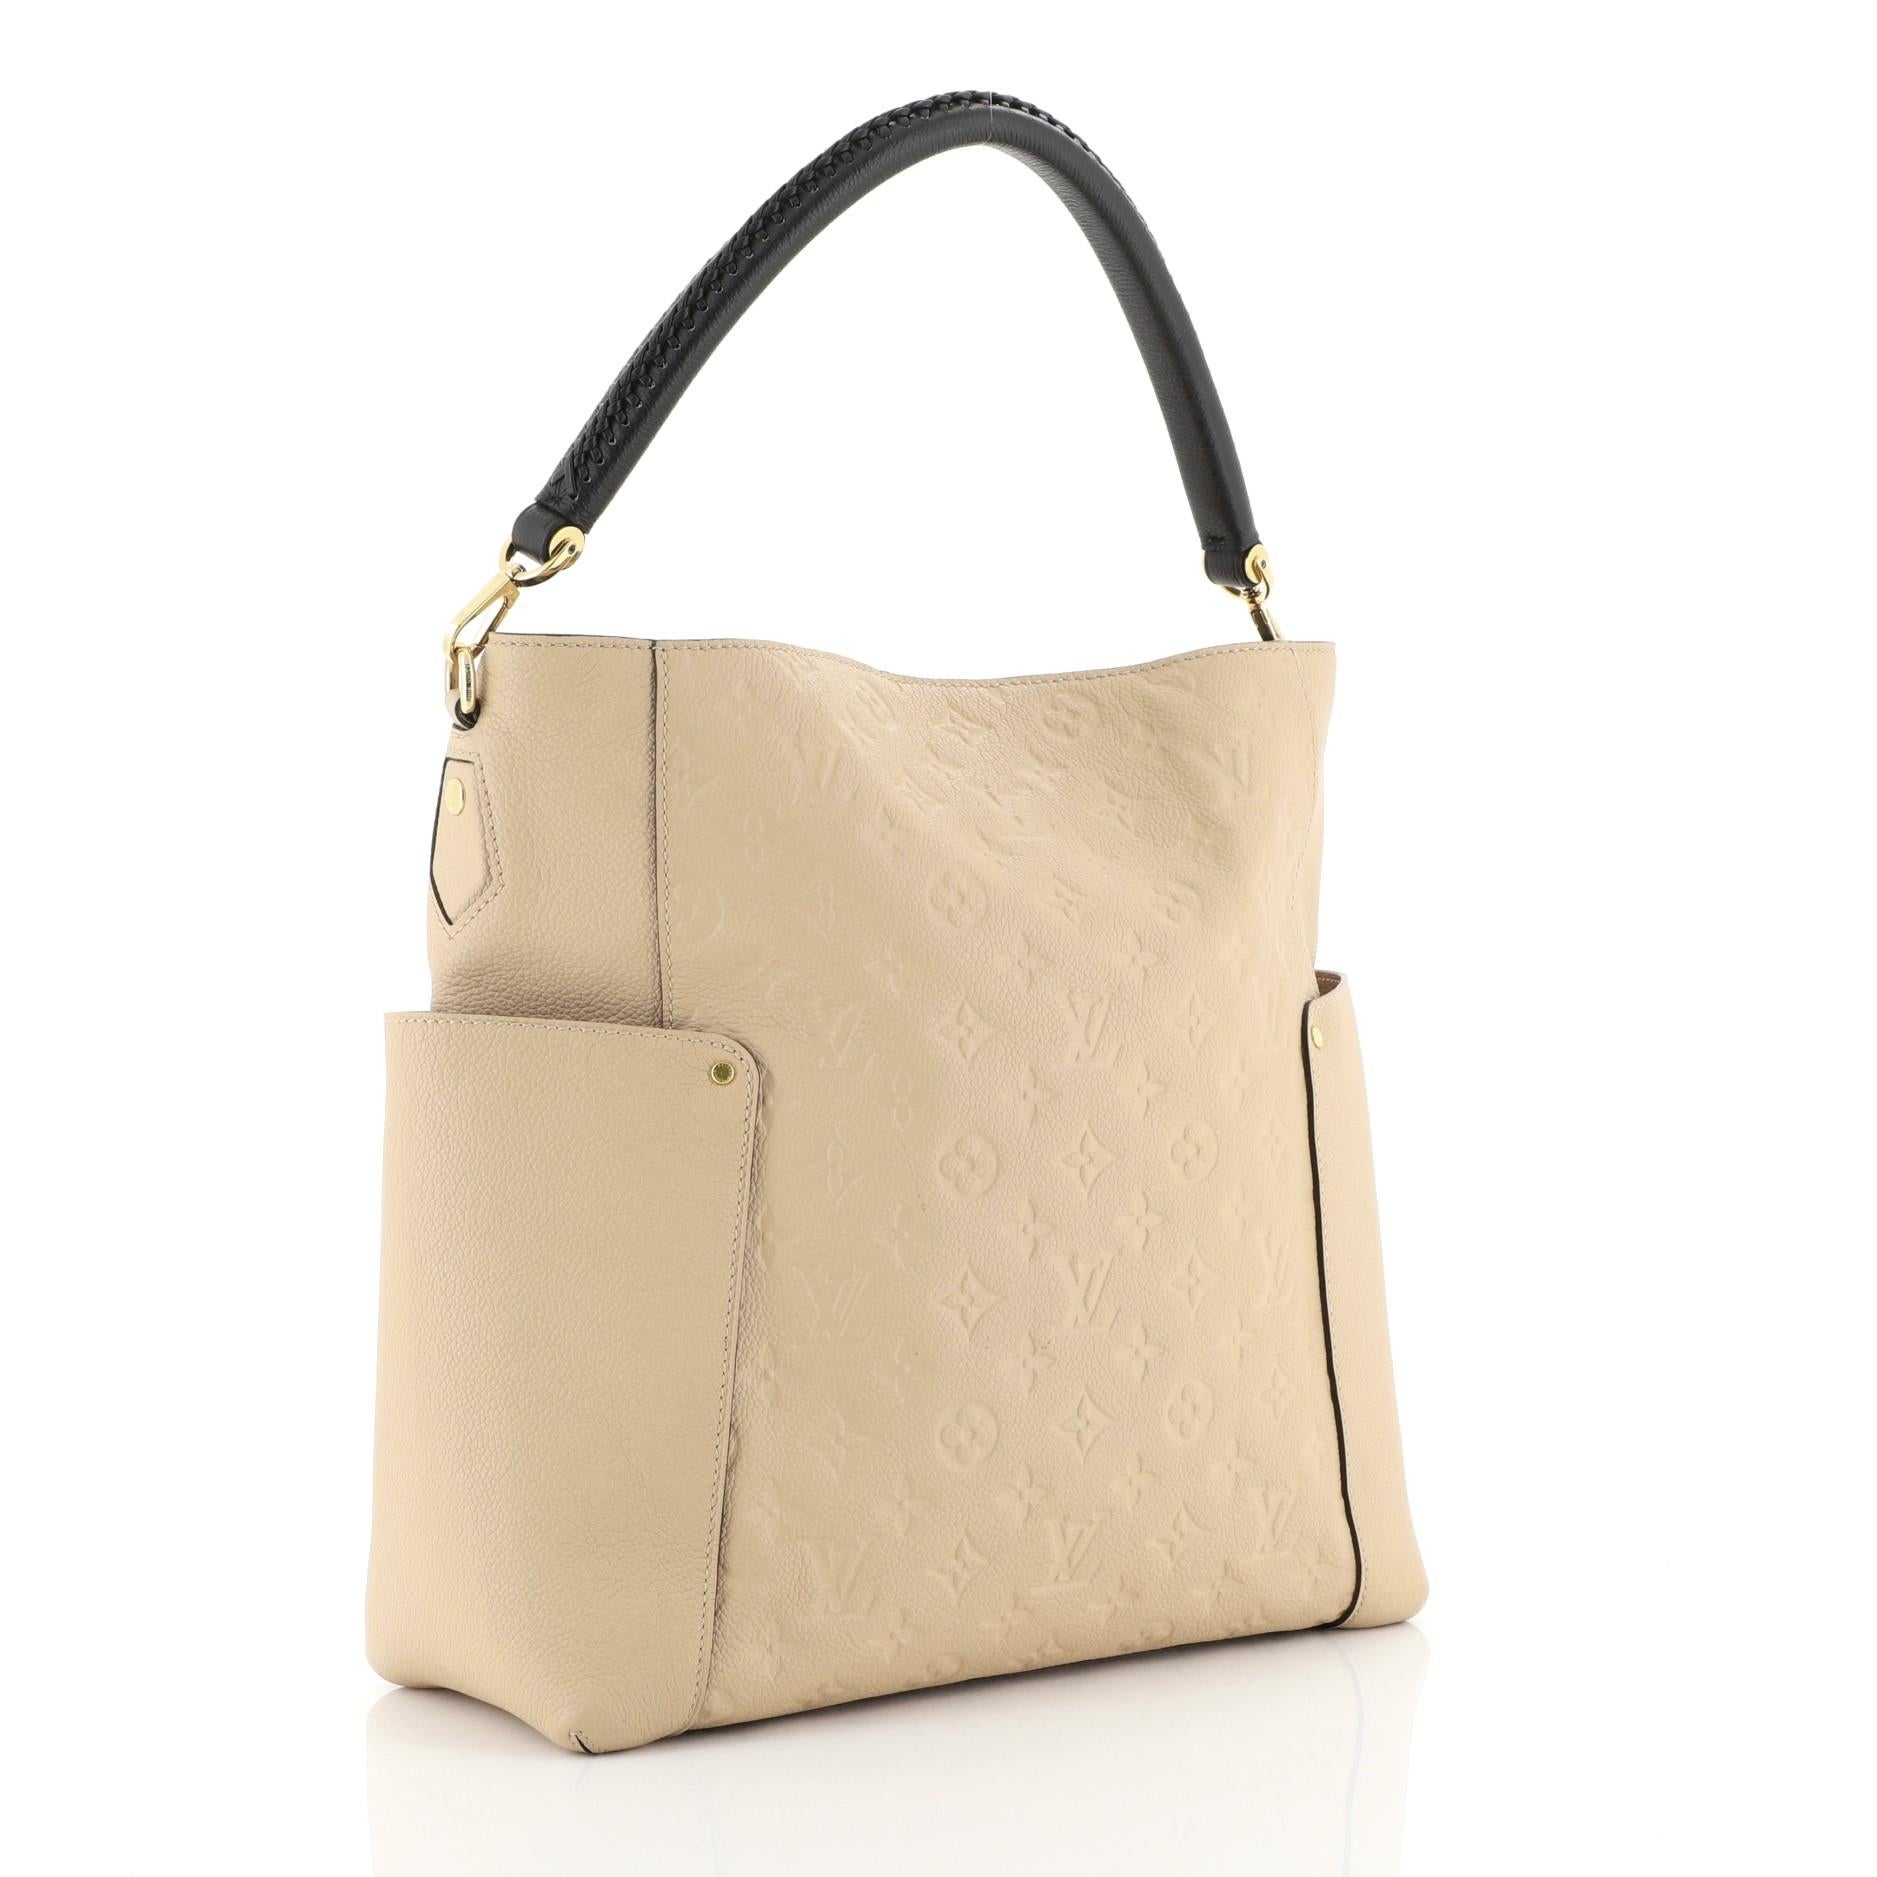 This Louis Vuitton Bagatelle Hobo Monogram Empreinte Leather, crafted from neutral monogram empreinte leather, features a braided handle, exterior flat pocket on each side, and gold-tone hardware. Its wide open top showcases a neutral fabric